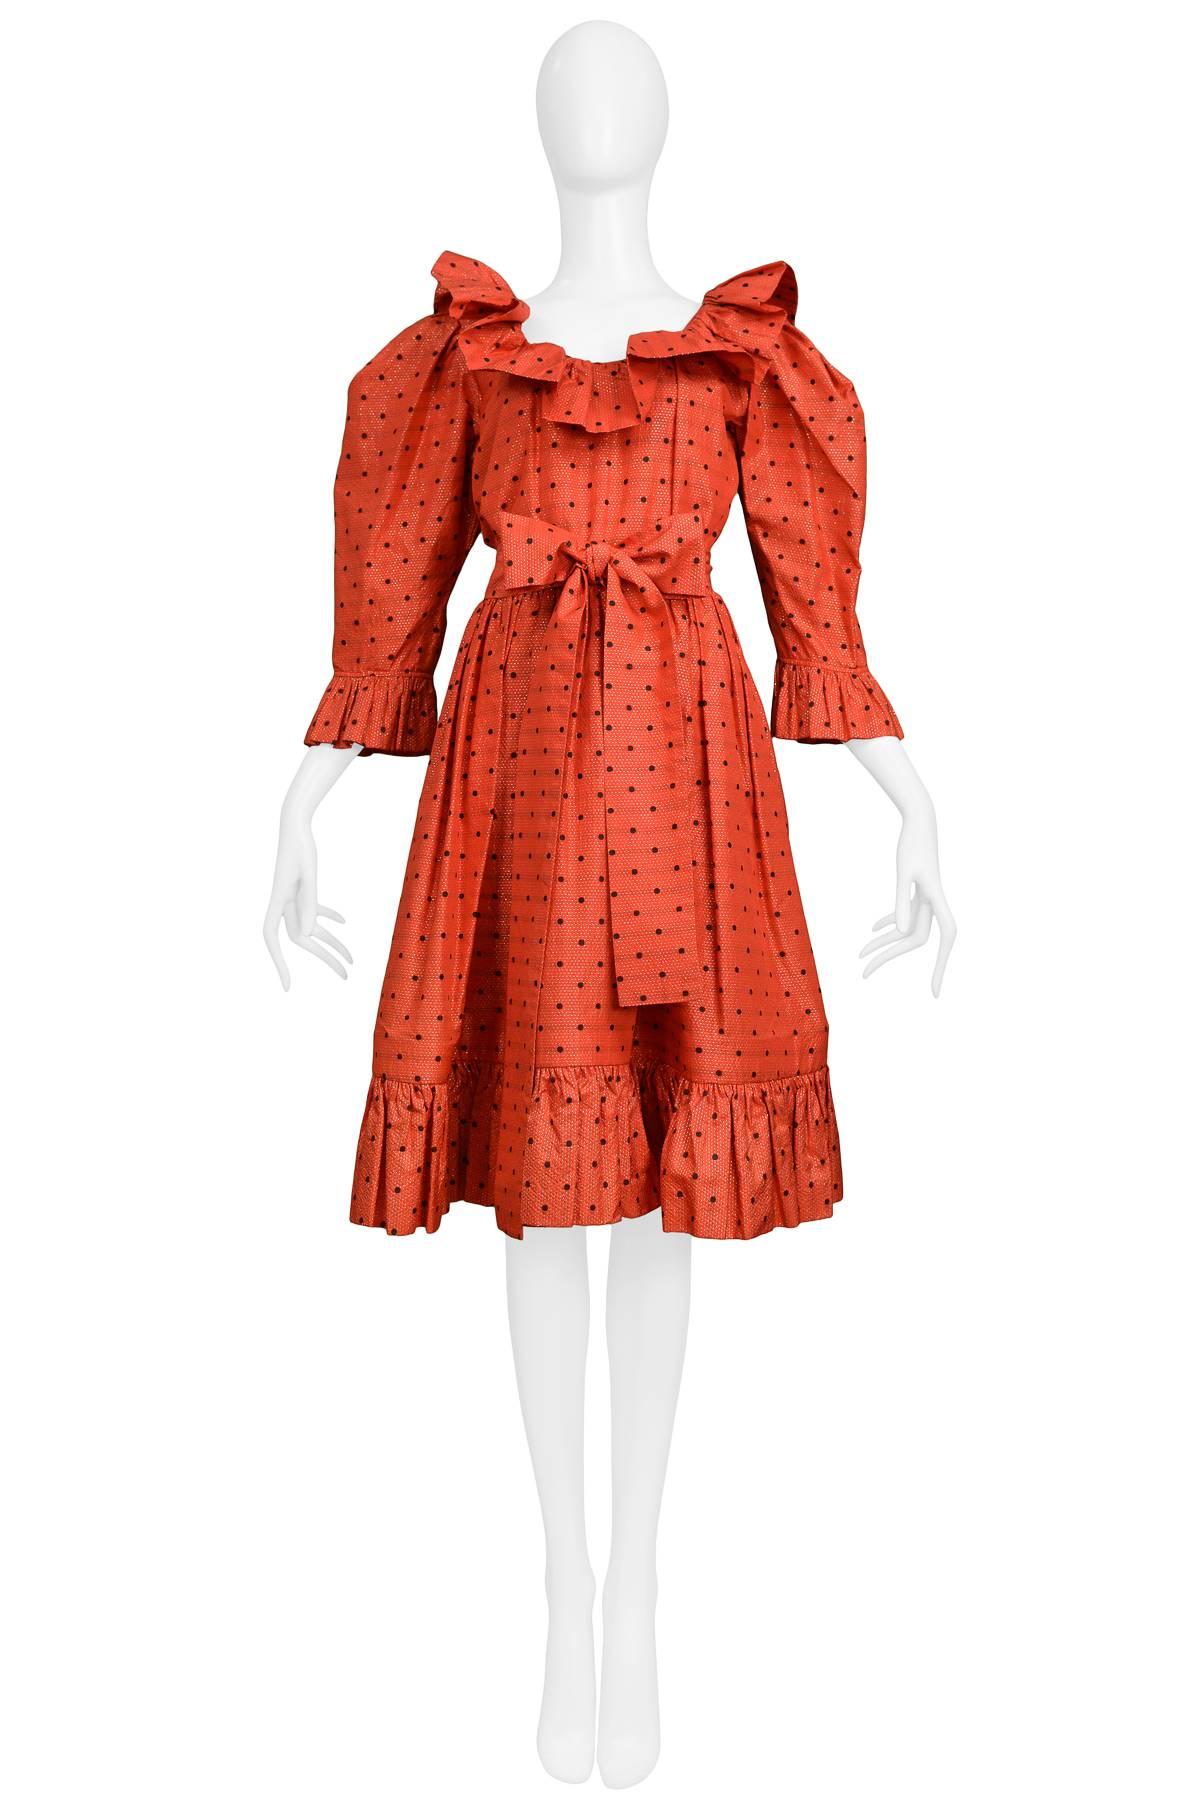 Vintage Yves Saint Laurent red taffeta evening frock featuring black polka dots and gold thread through out. The dress is adorned with ruffles at the neckline, cuffs and flounce and features a gathered waist with a matching sash.
Please inquire for